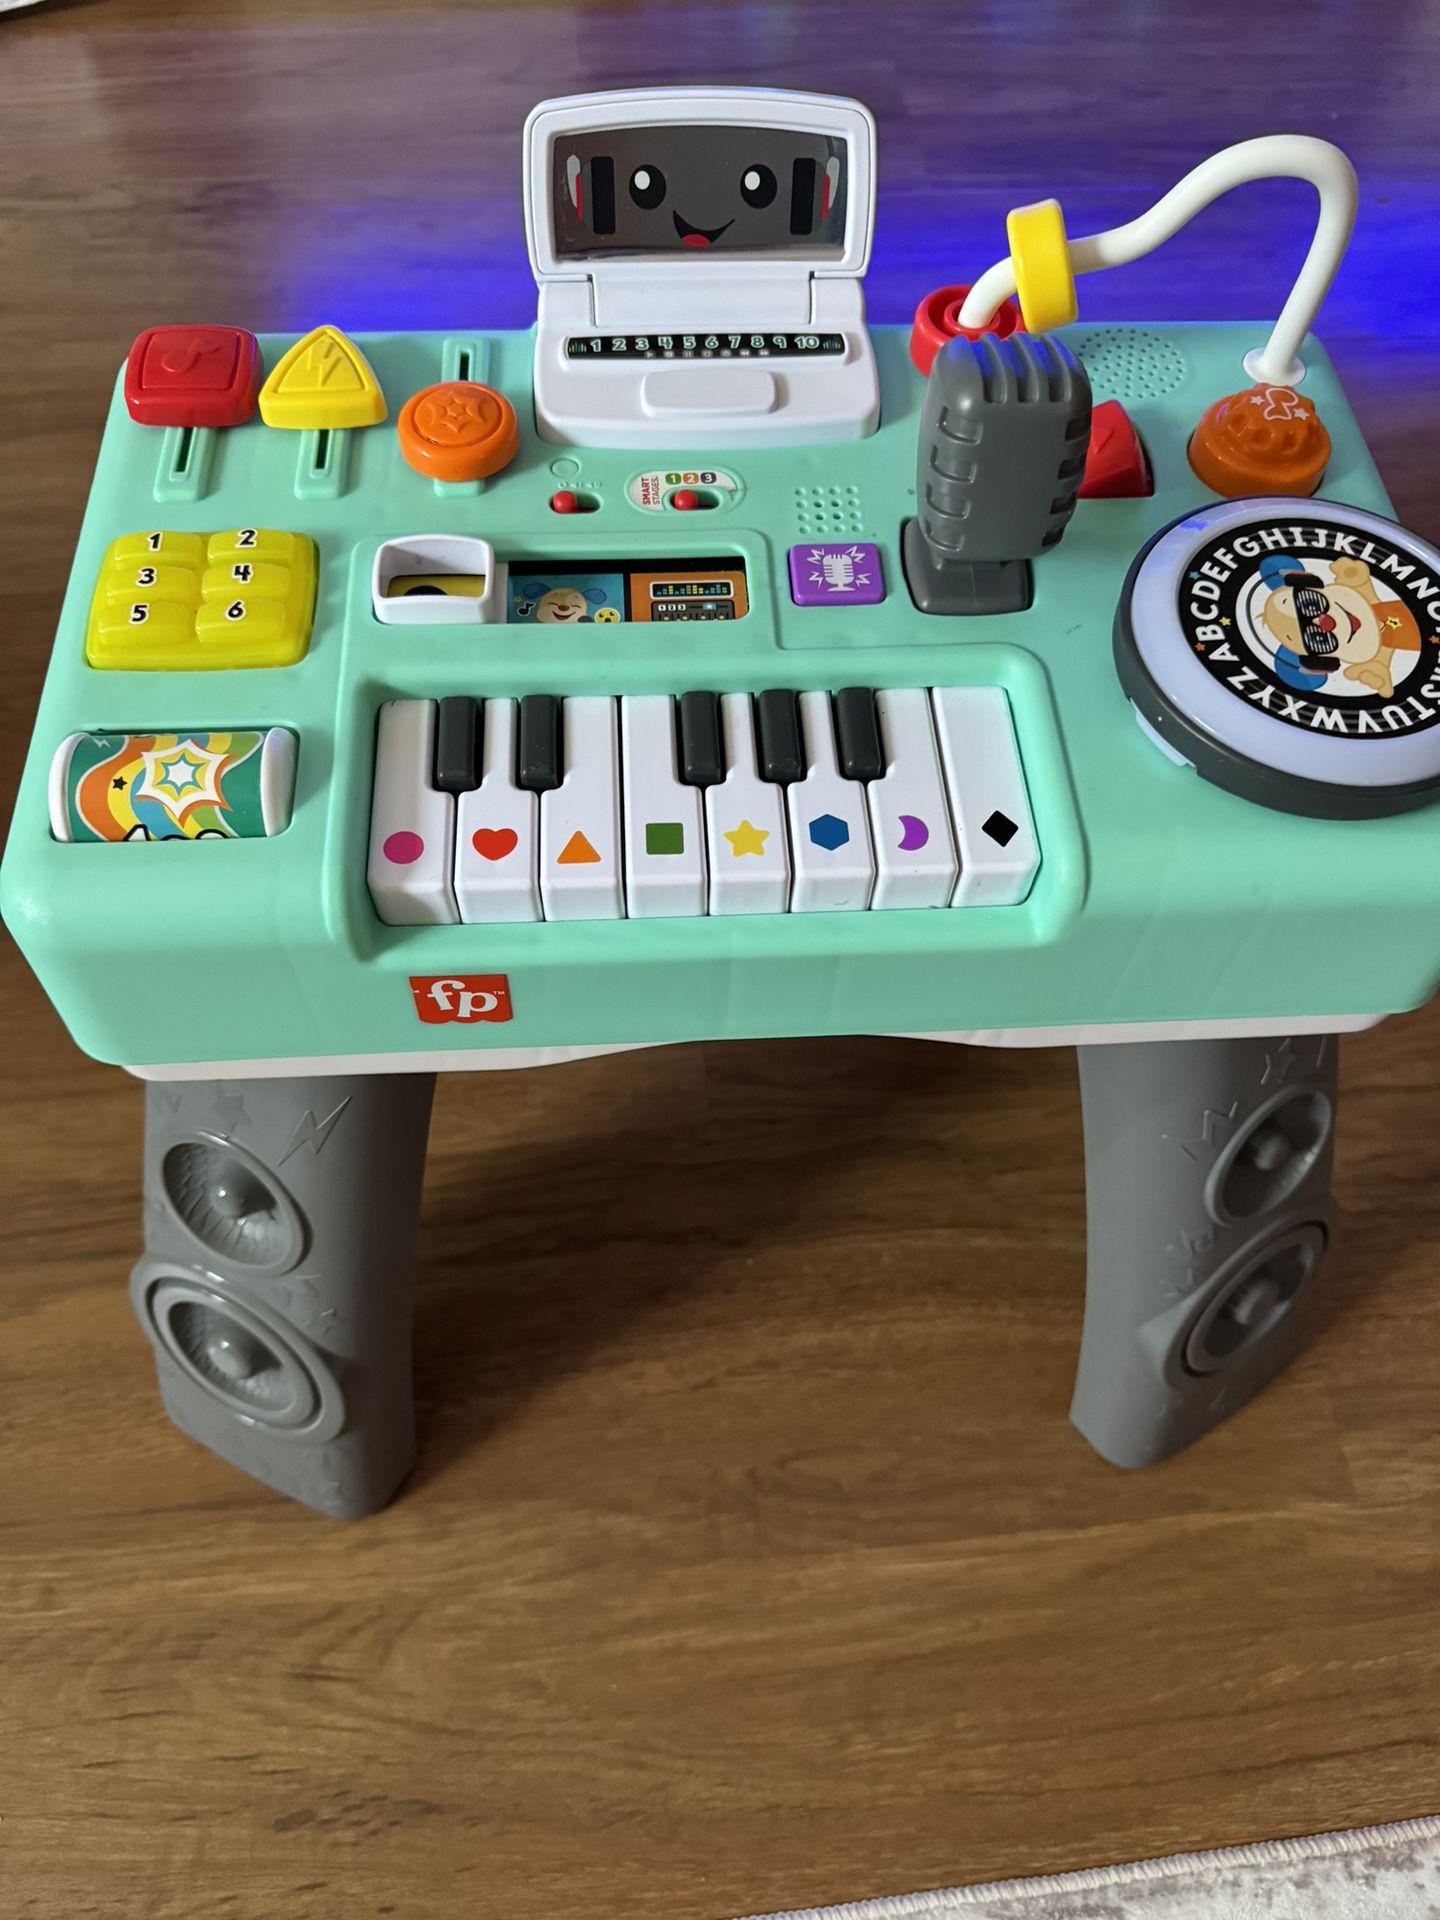 Fisher Price Activity Table 